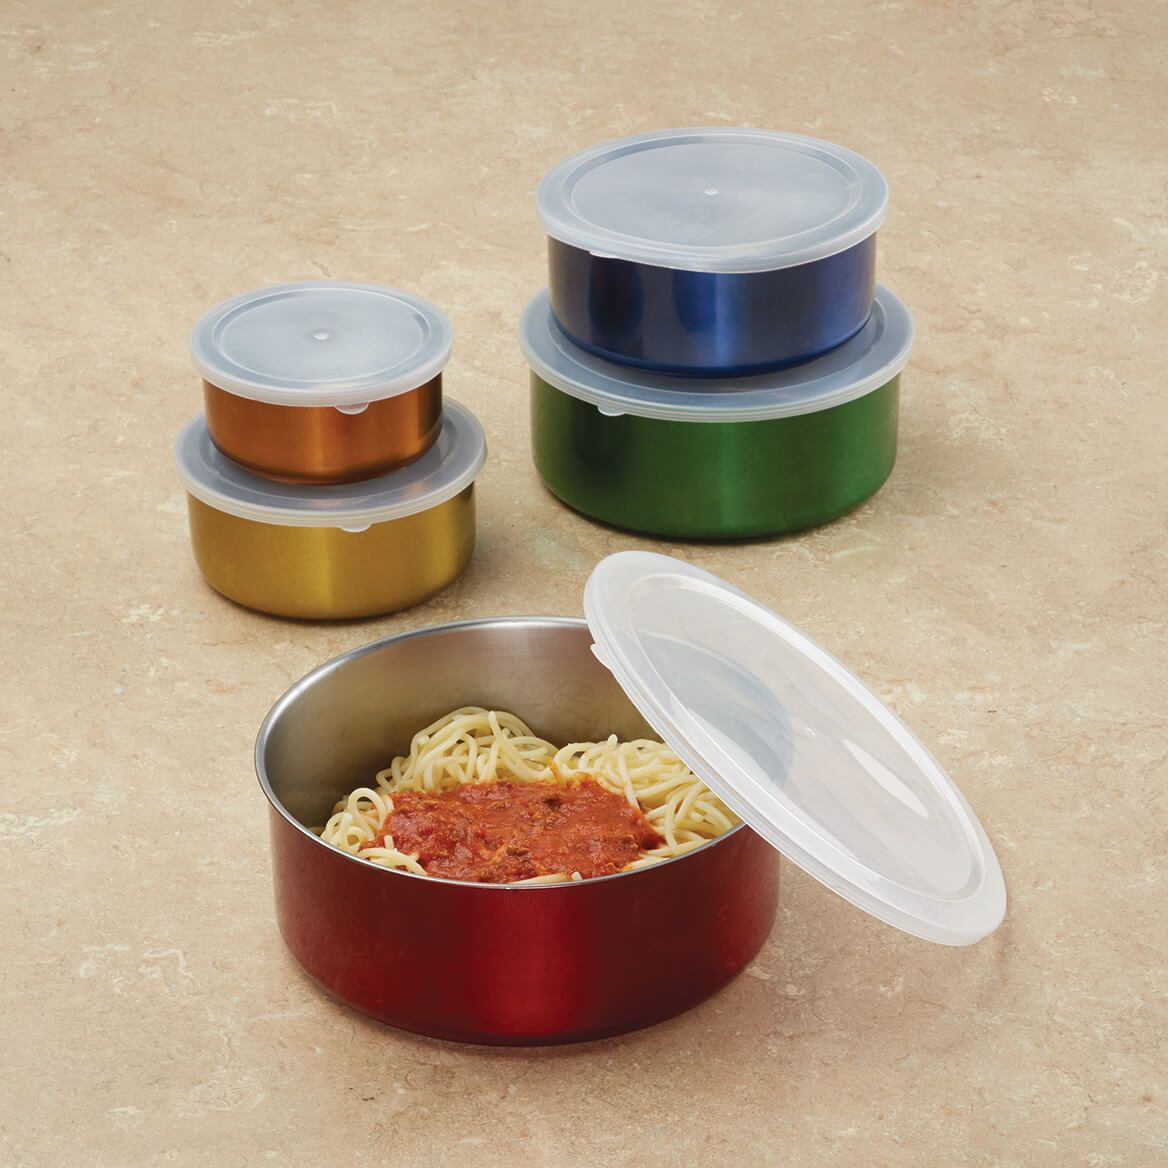 Colorful Stainless Steel Storage Bowls with Lids, Set of 5 + '-' + 372997